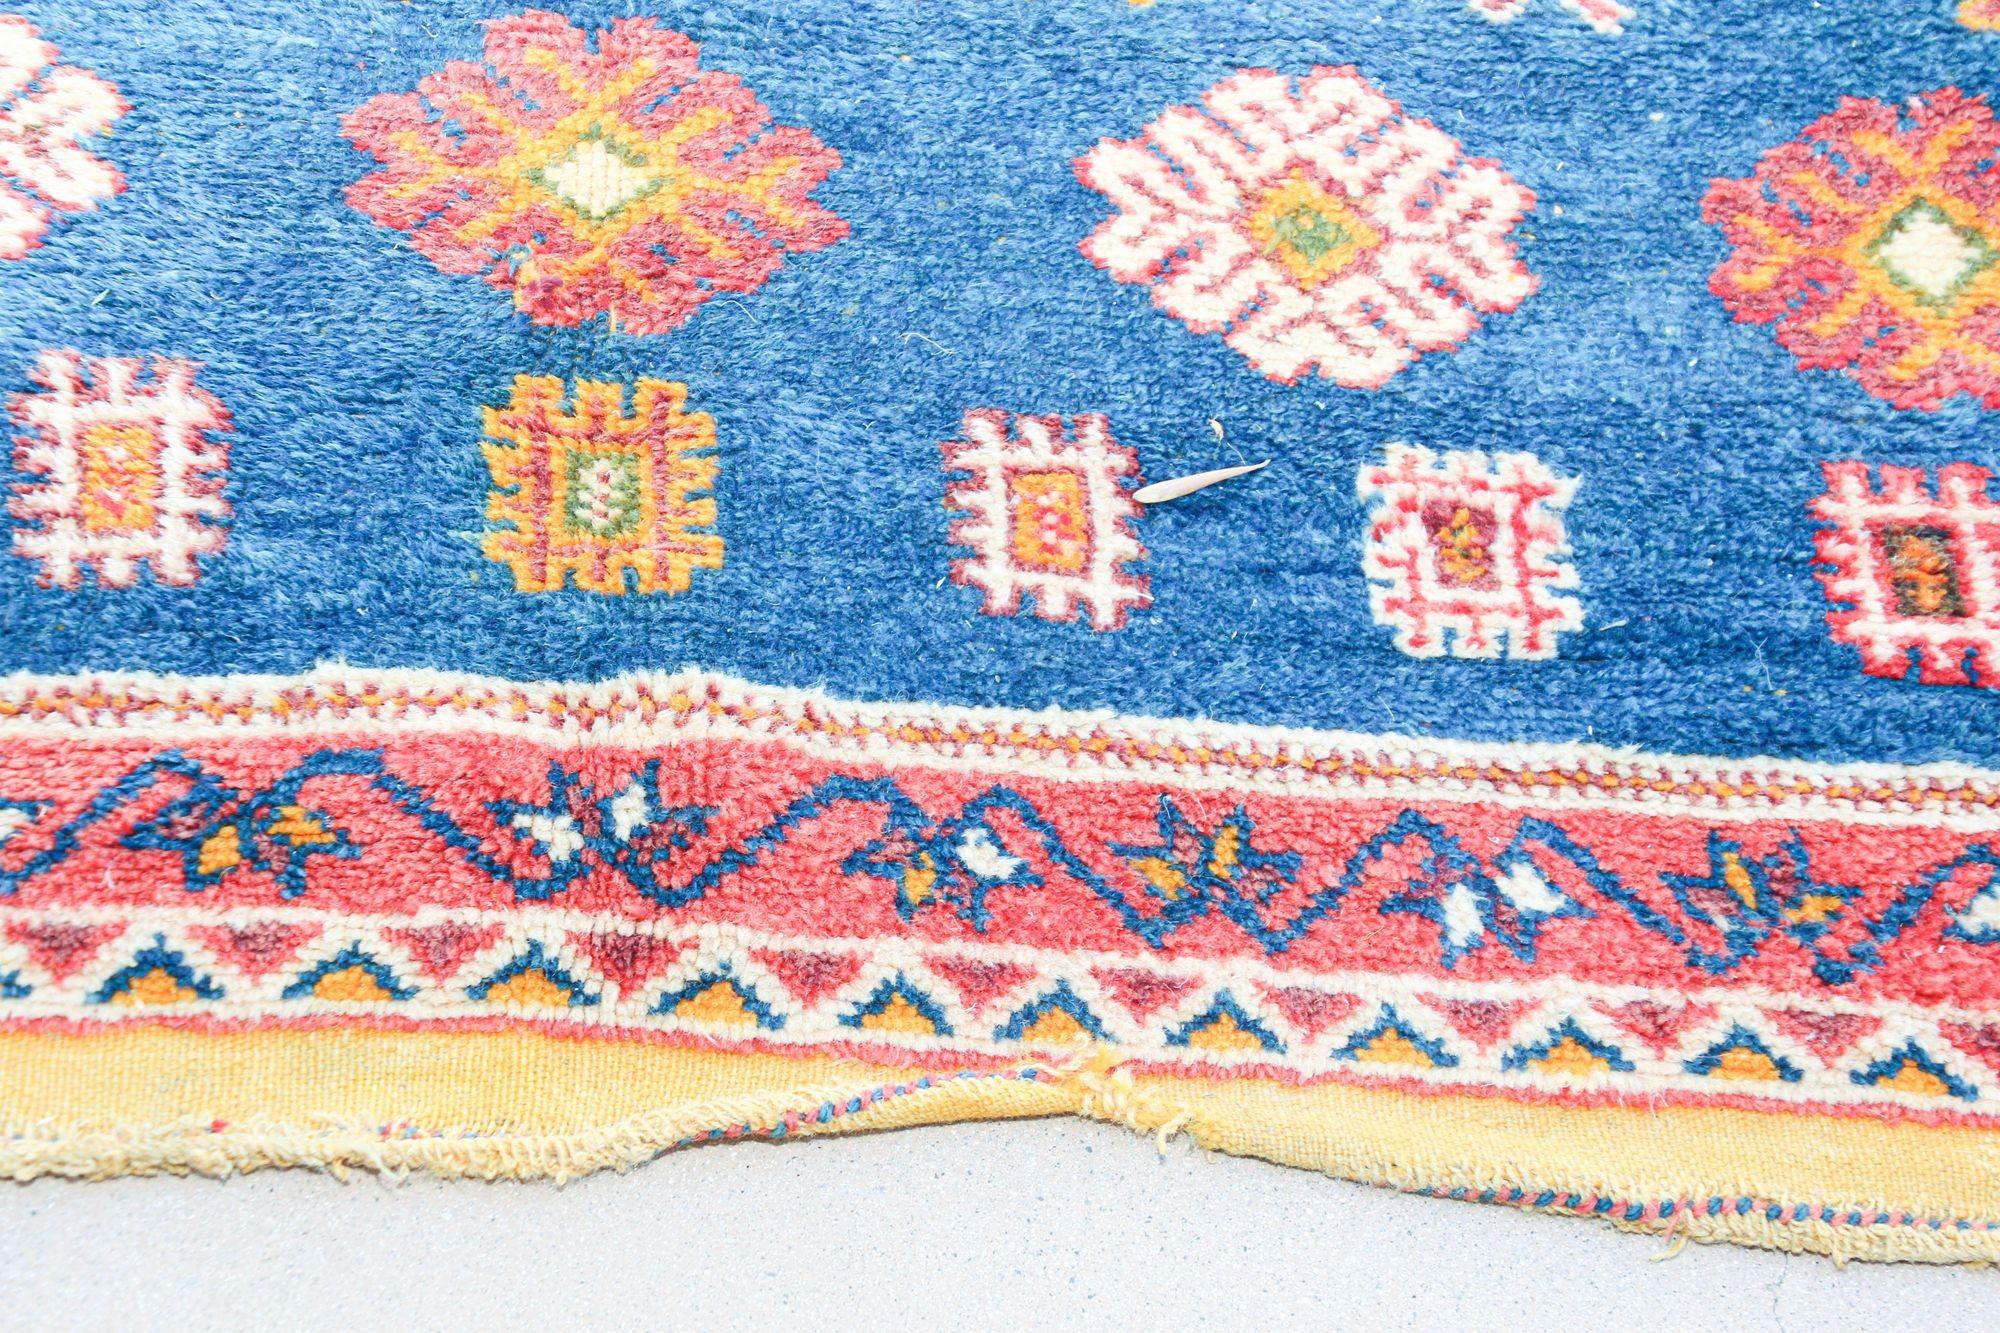 Vegetable Dyed 1960s Moroccan Berber Rug in Royal Blue, Pink and Orange Colors For Sale